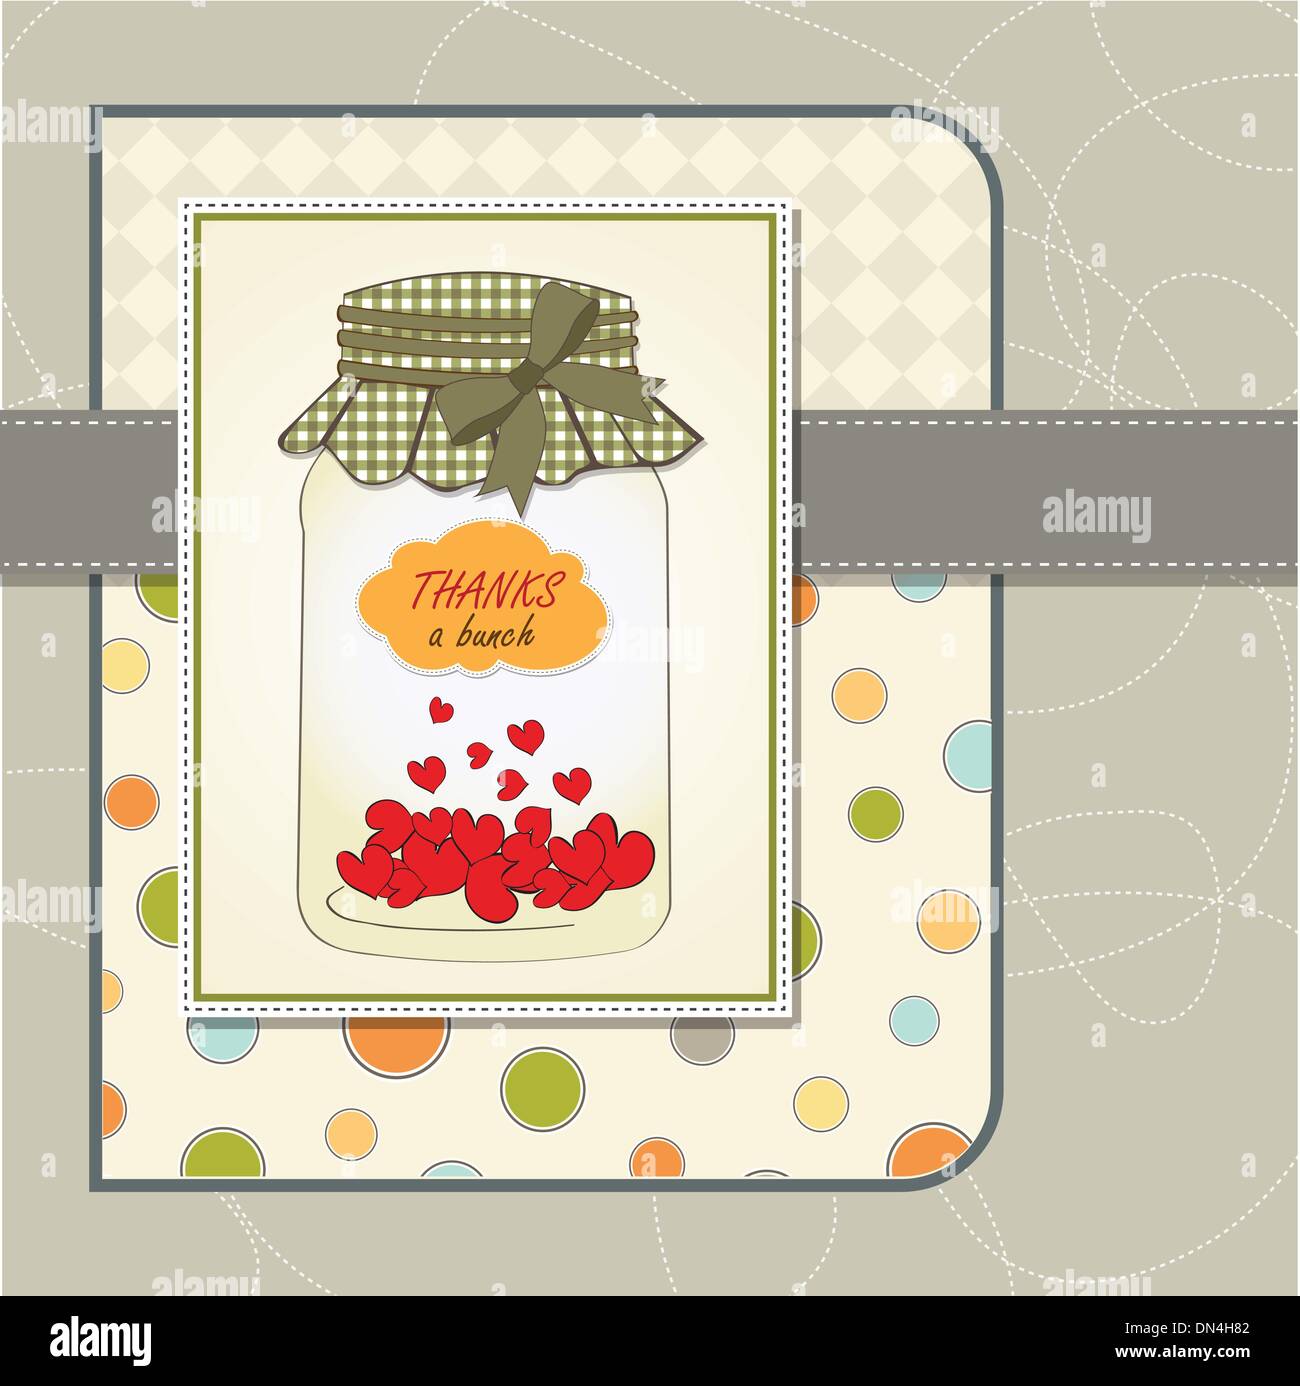 Thank you greeting card with hearts plugged into the jar Stock Vector